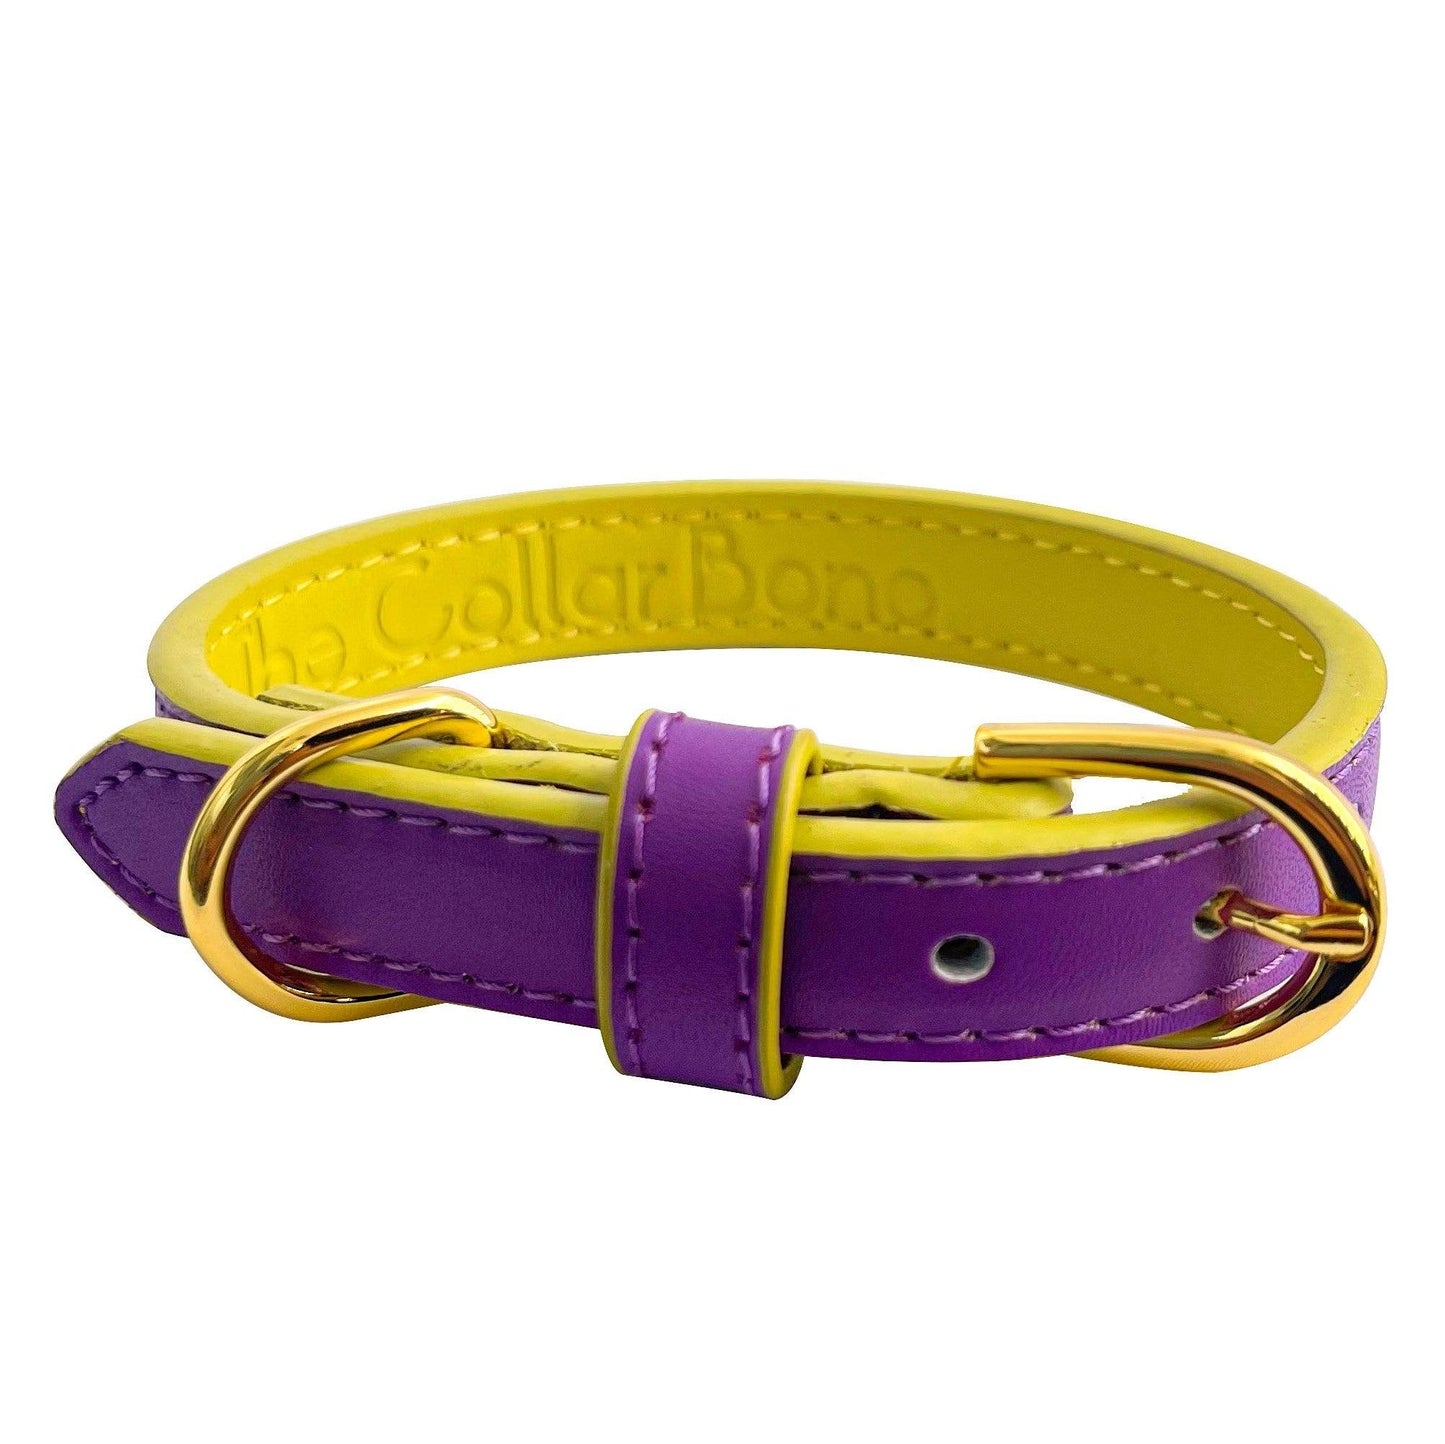 Anthea Dog Collar in Purple with Yellow Trimmings